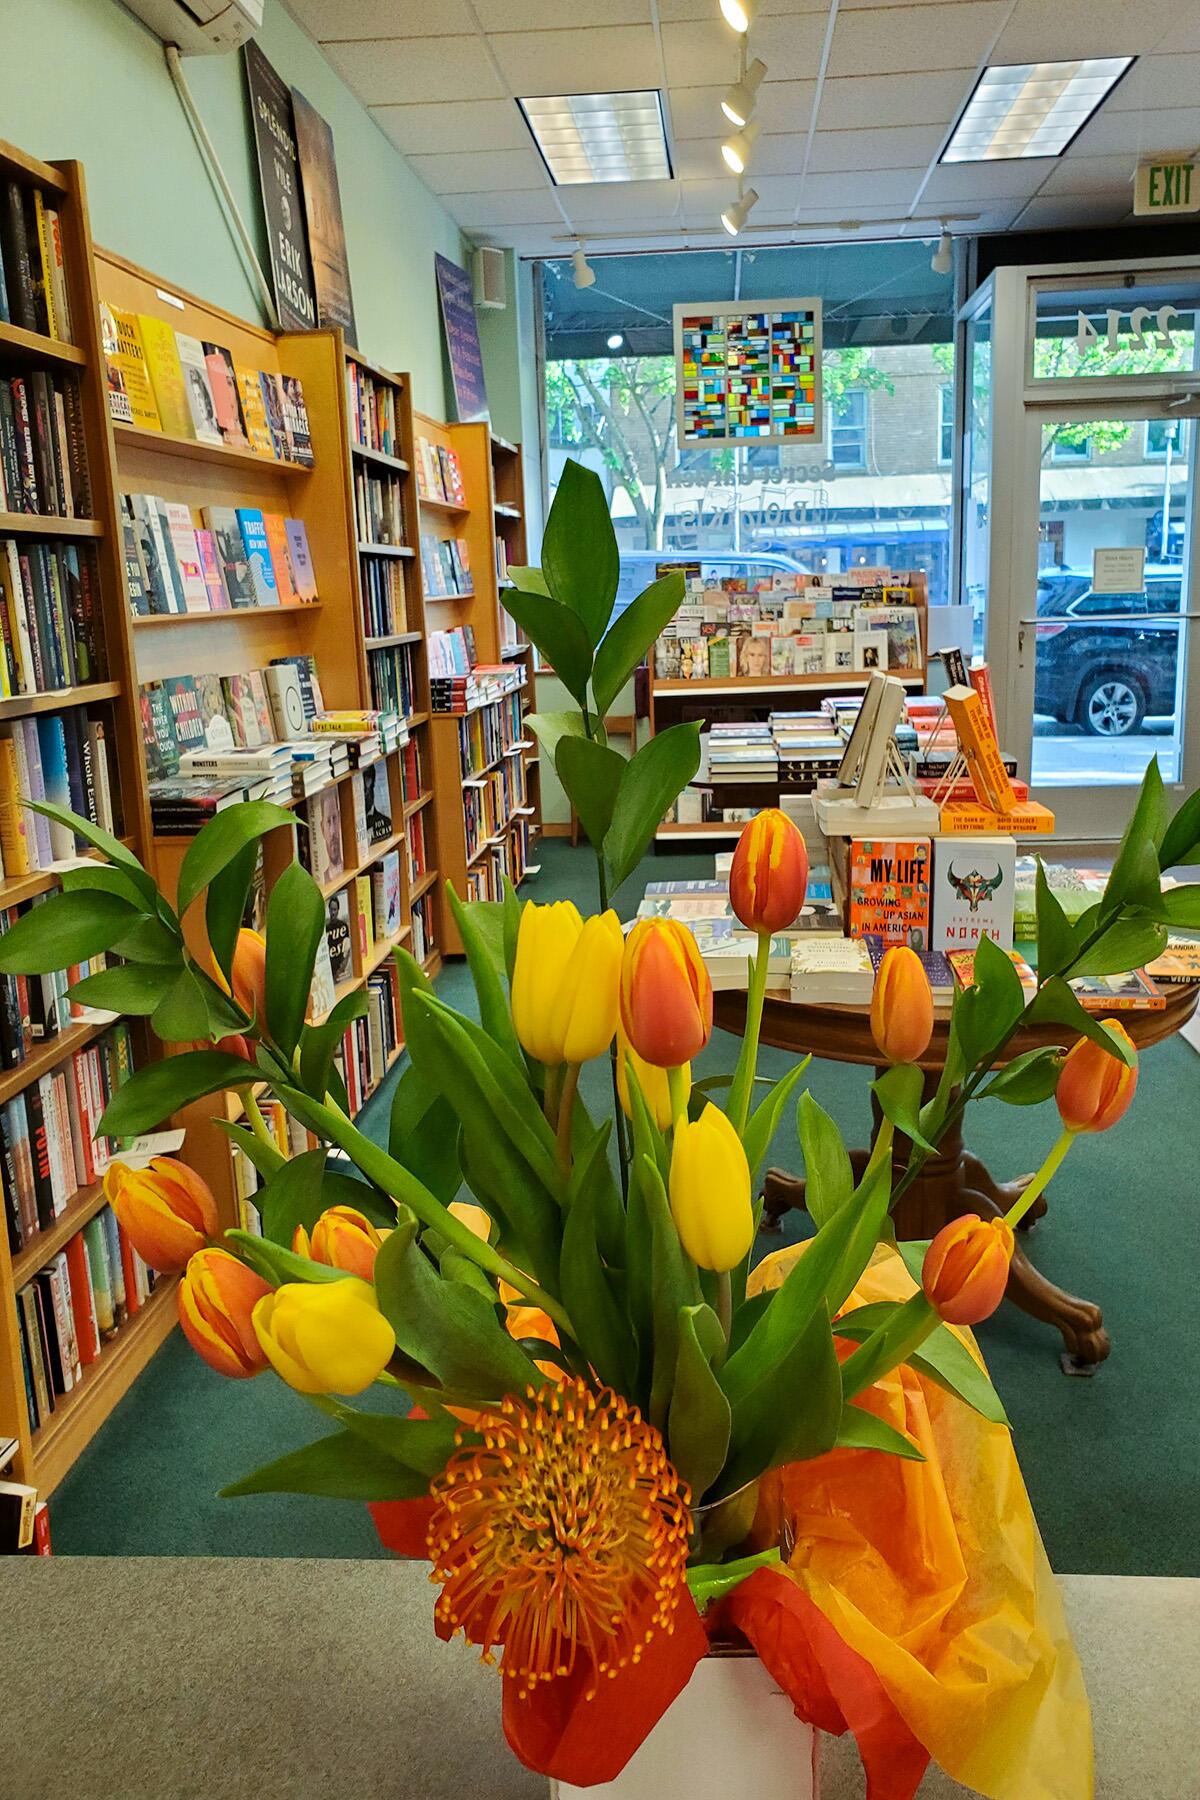 <a href='https://www.fodors.com/world/north-america/usa/washington/seattle/experiences/news/photos/a-book-lovers-guide-to-seattles-best-bookstores#'>From &quot;The 10 Best Bookstores in Seattle: Secret Garden Books&quot;</a>